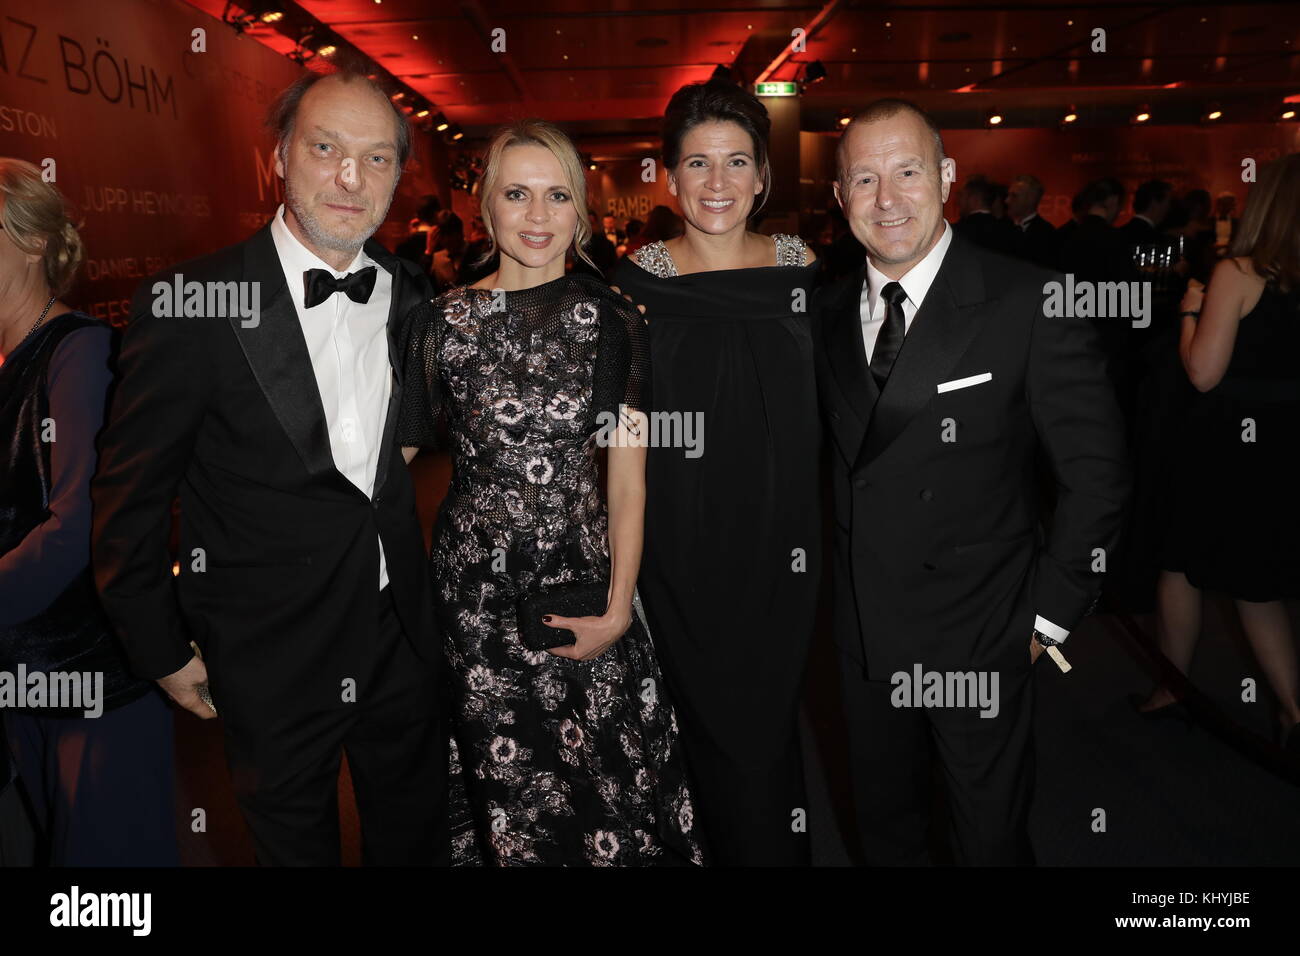 Actor Heino Ferch (R) and his wife, equestrian athlete Marie-Jeanette Ferch (2-R) arrive for the 69th Bambi Award Ceremony in Berlin, Germany, 16 November 2017. Next to them are actor Martin Brambach and his partner the actress Christine Sommer. Photo: Jörg Carstensen/dpa Stock Photo